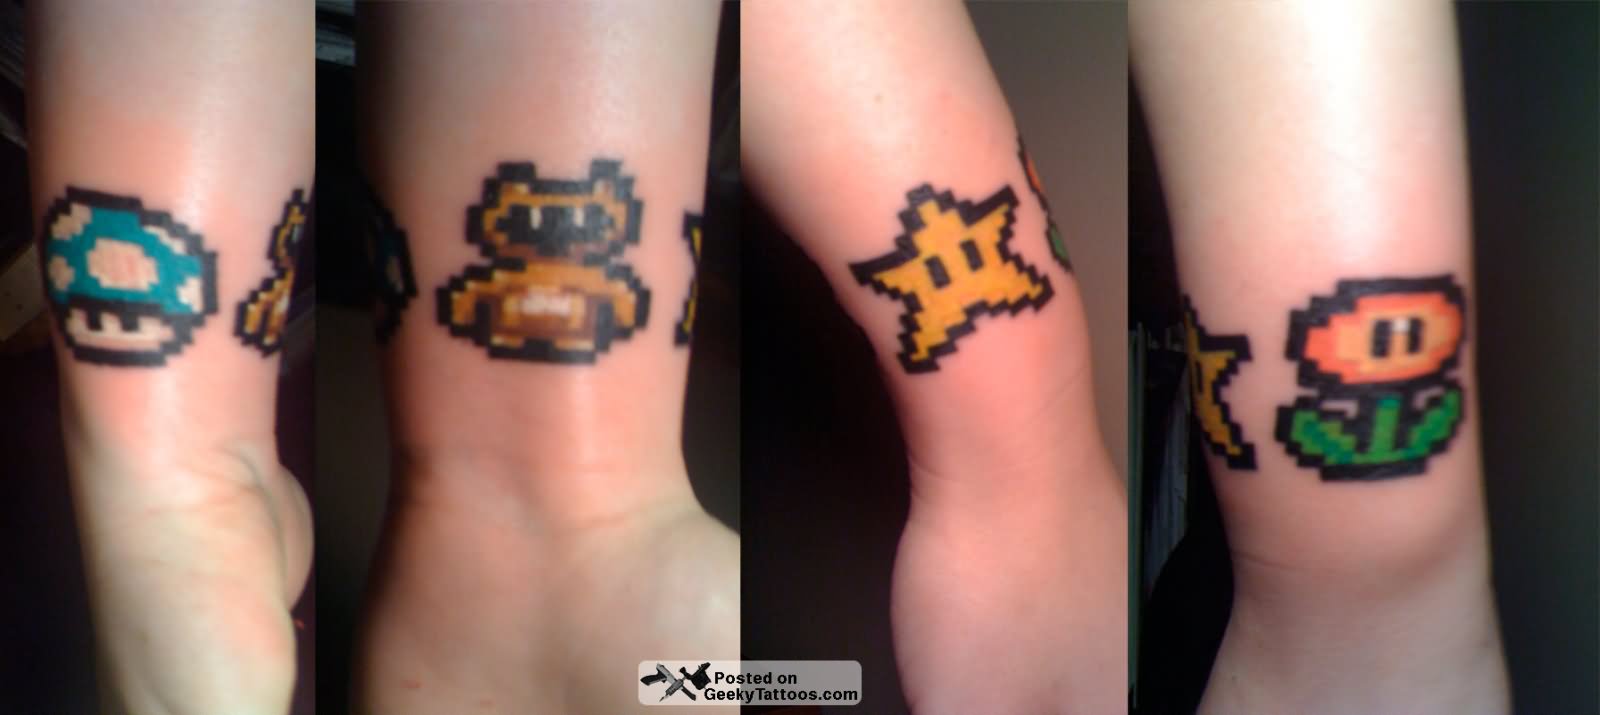 Colored Geek Tattoos On Arm